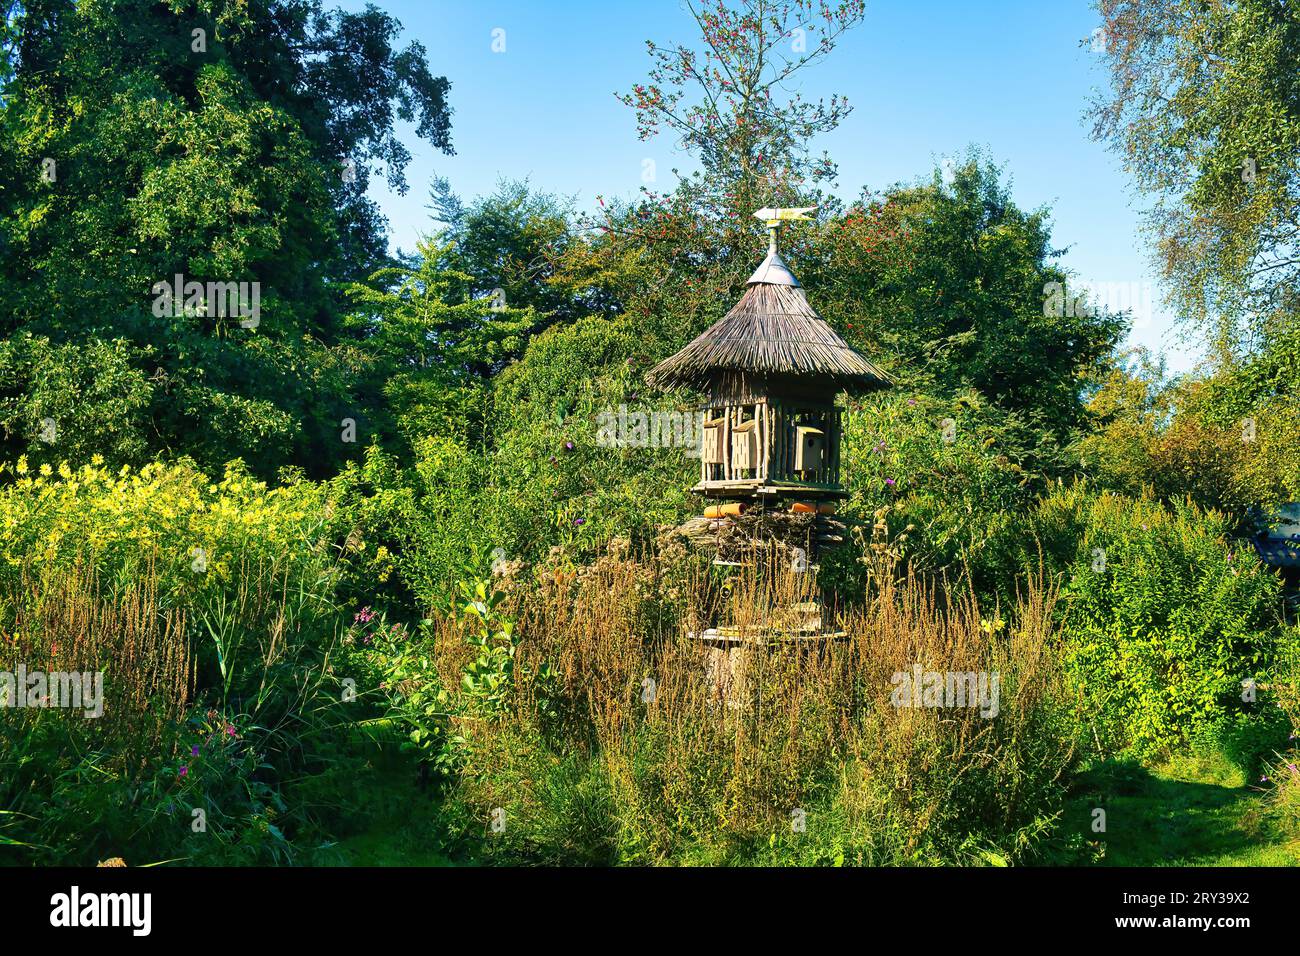 Large structure made of wood an thatch in a mature garden, with nesting boxes for birds and an insect hotel Stock Photo